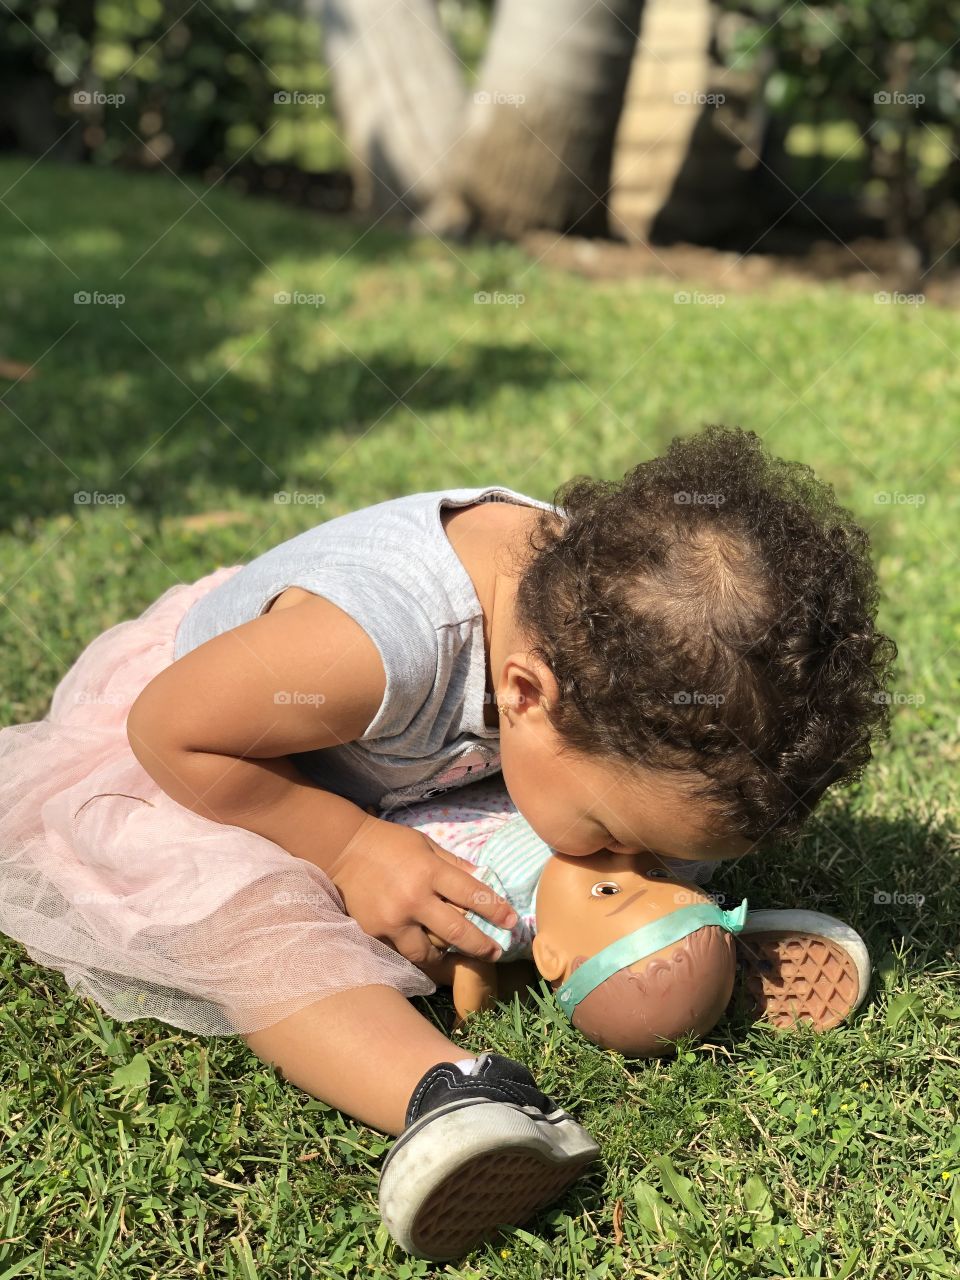 Baby kissing her doll 